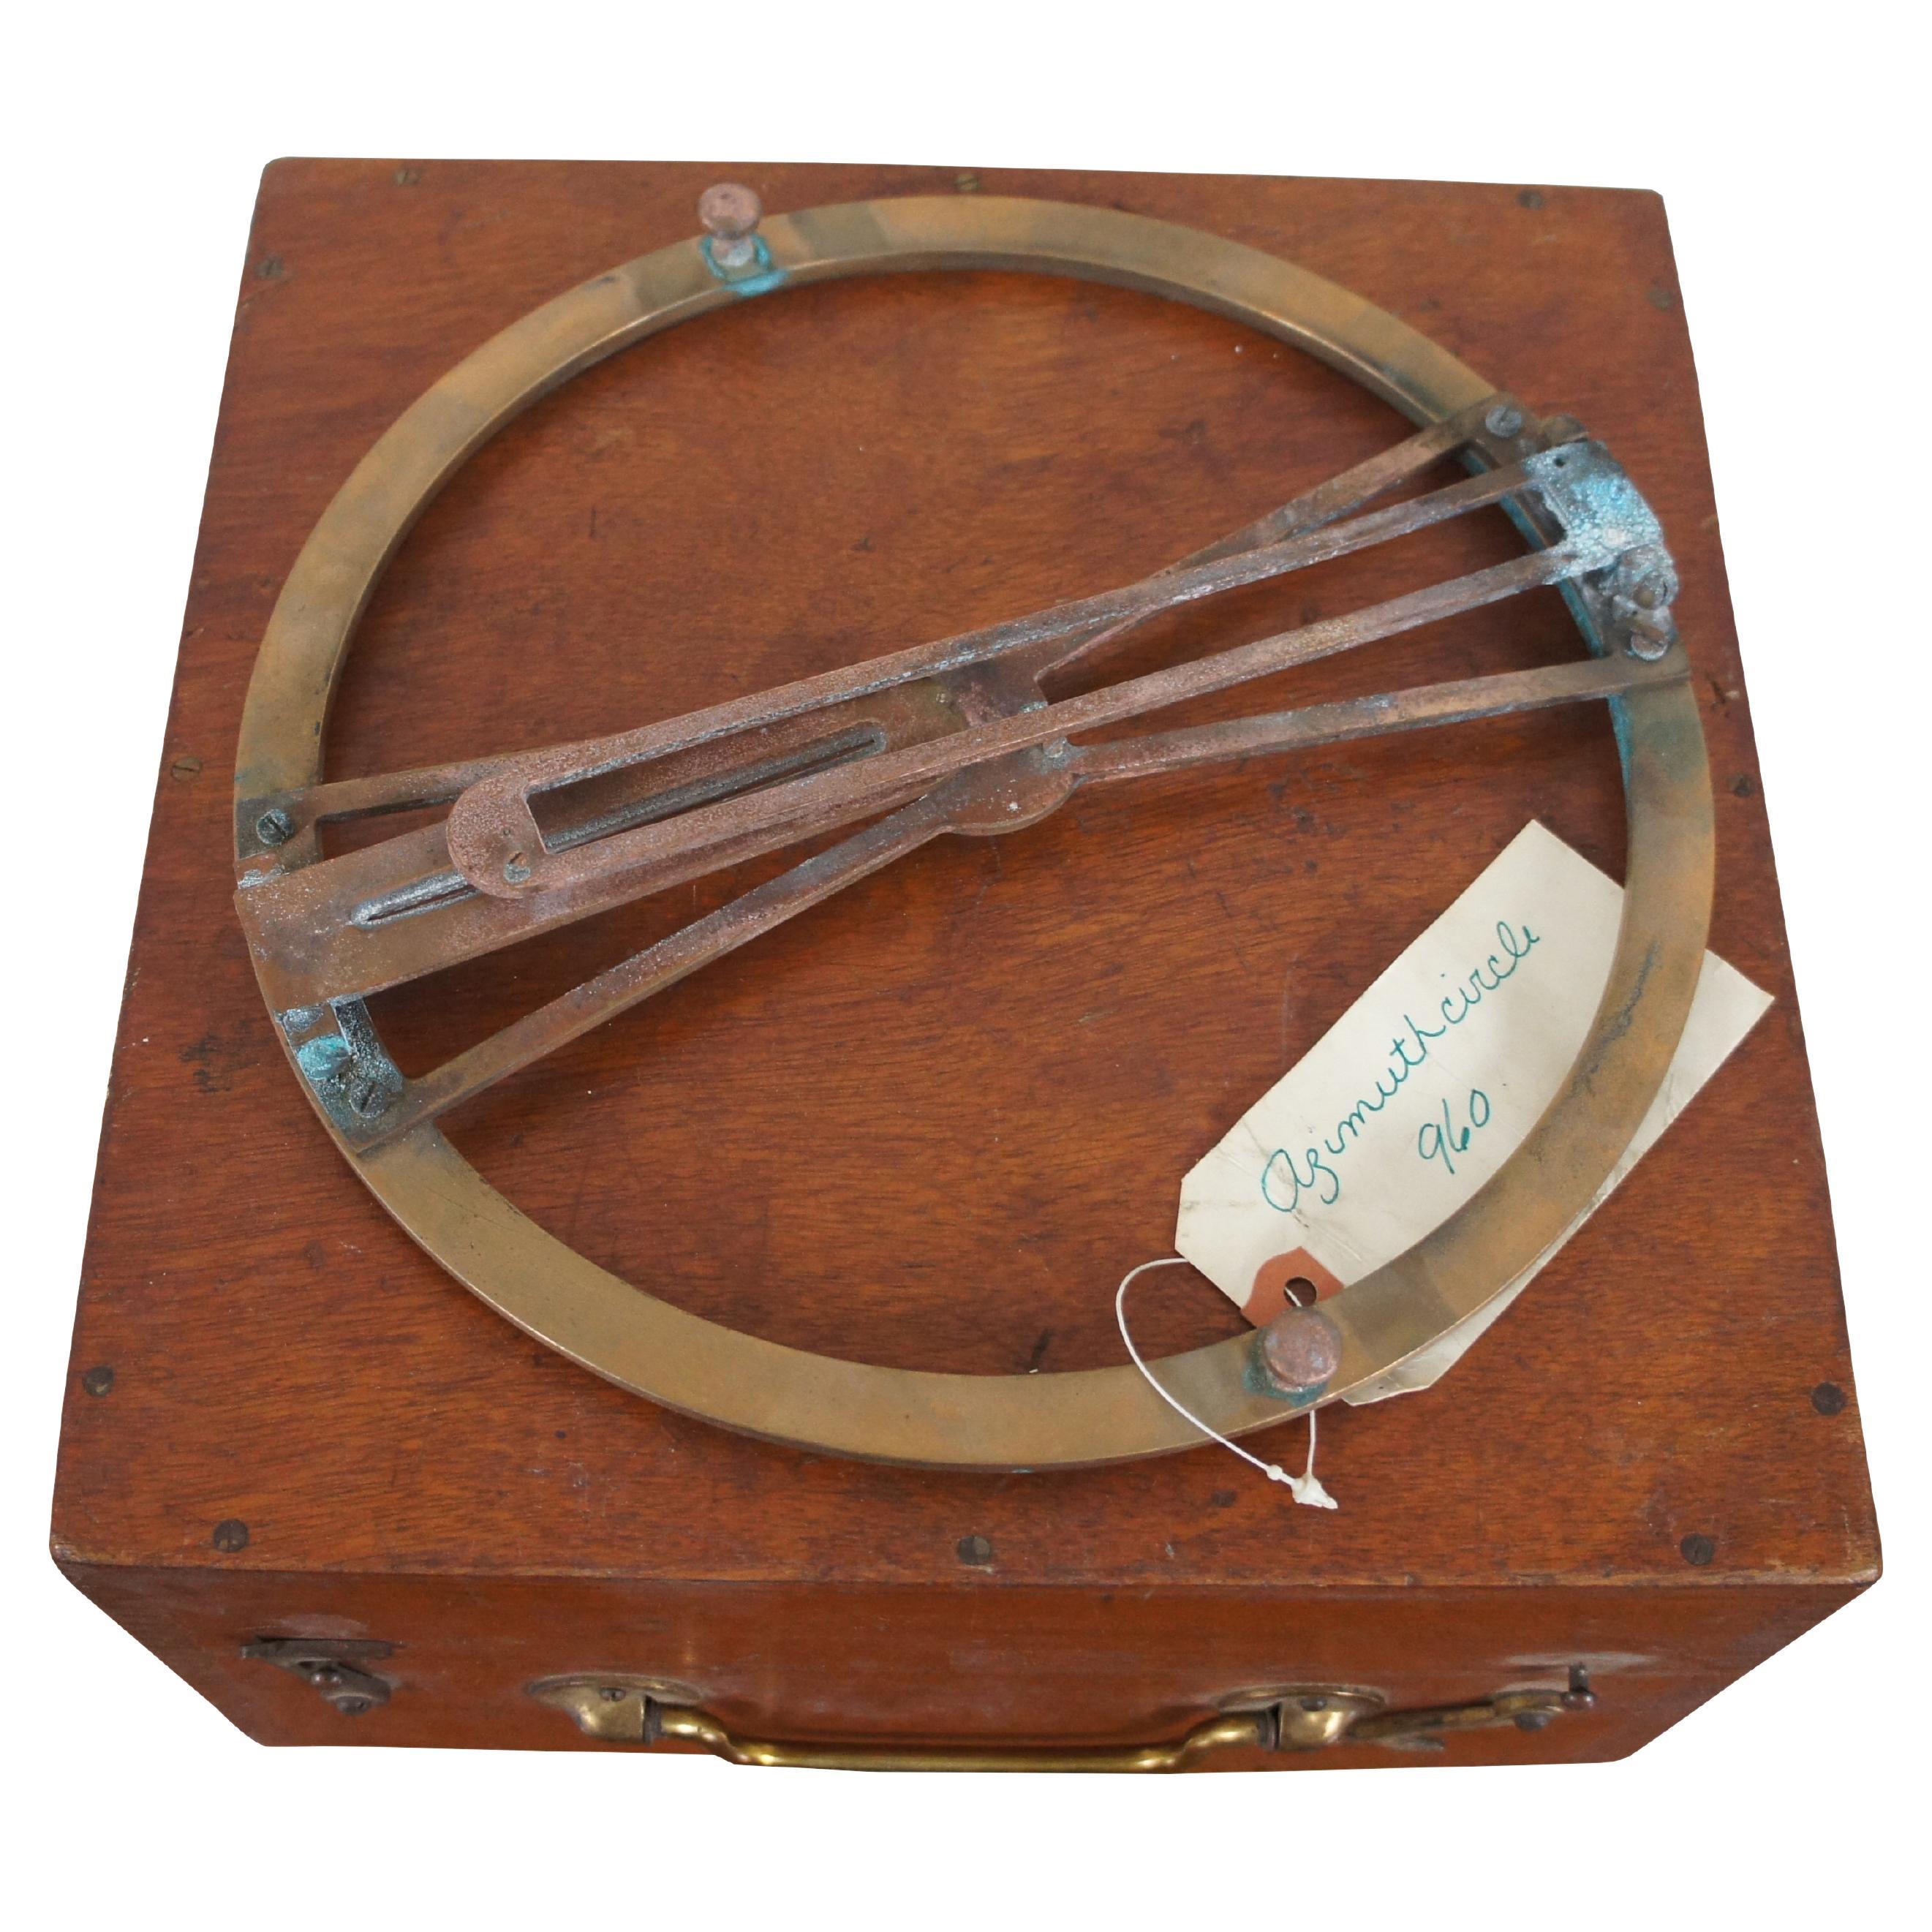 WWII Era Thomson System Azimuth Instrument and wooden storage / carrying case.

An azimuth circle is a navigation instrument in the form of a brass ring with sights that attaches to the top of a compass to enable the user to take accurate bearings